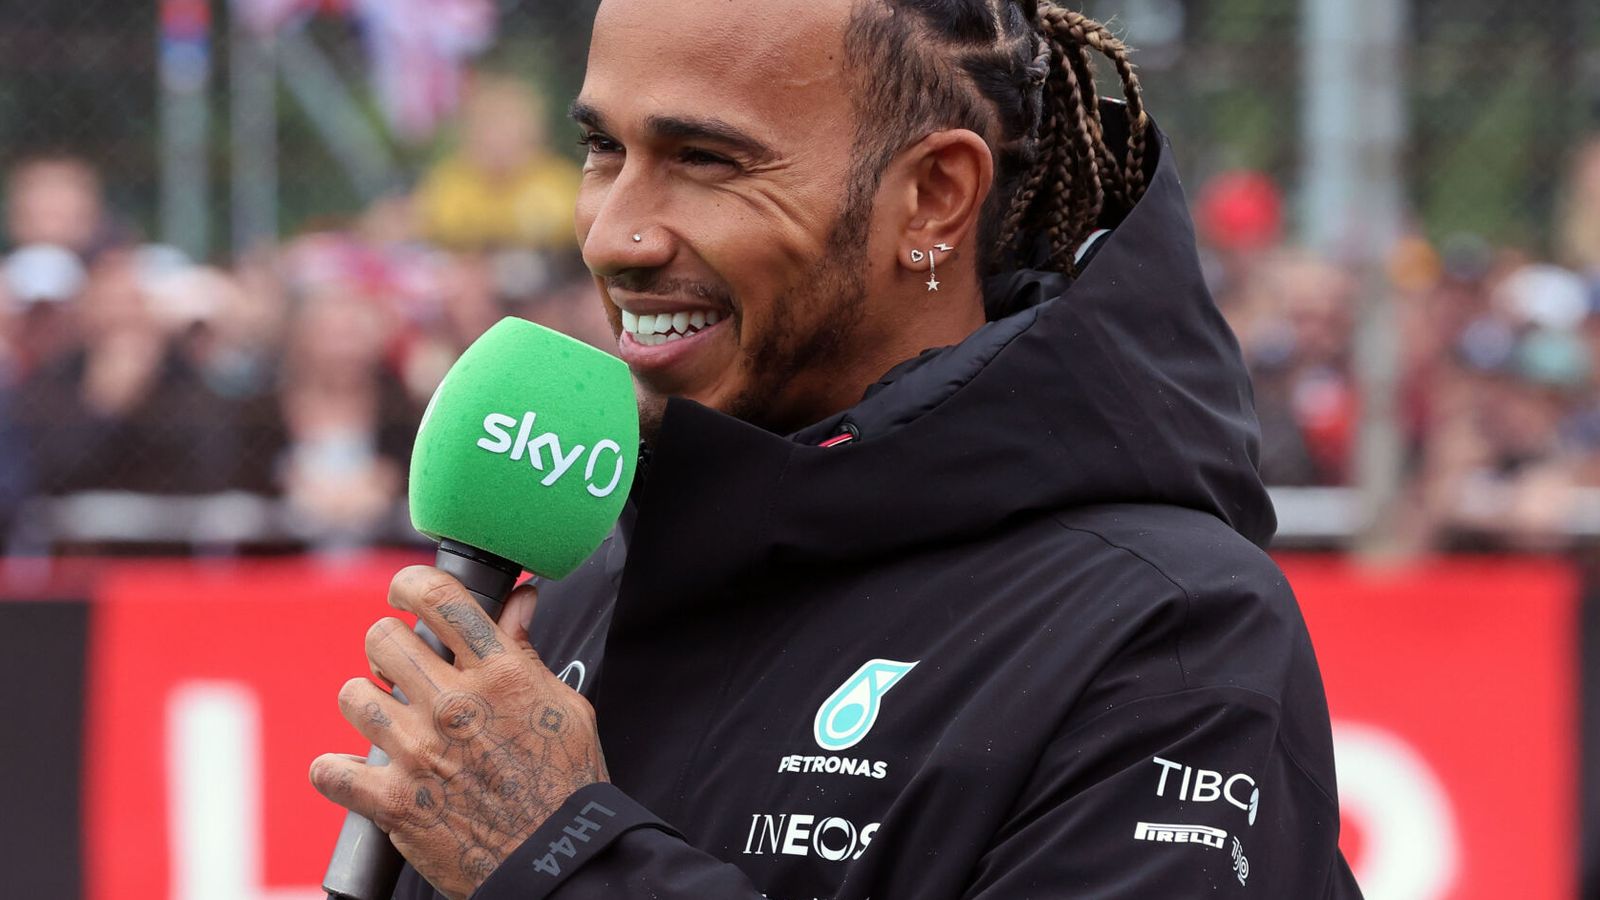 Lewis Hamilton Exclusive: ‘I’m Going To Rise Again’ After ‘painful’ Abu Dhabi And F1 2022 Struggles